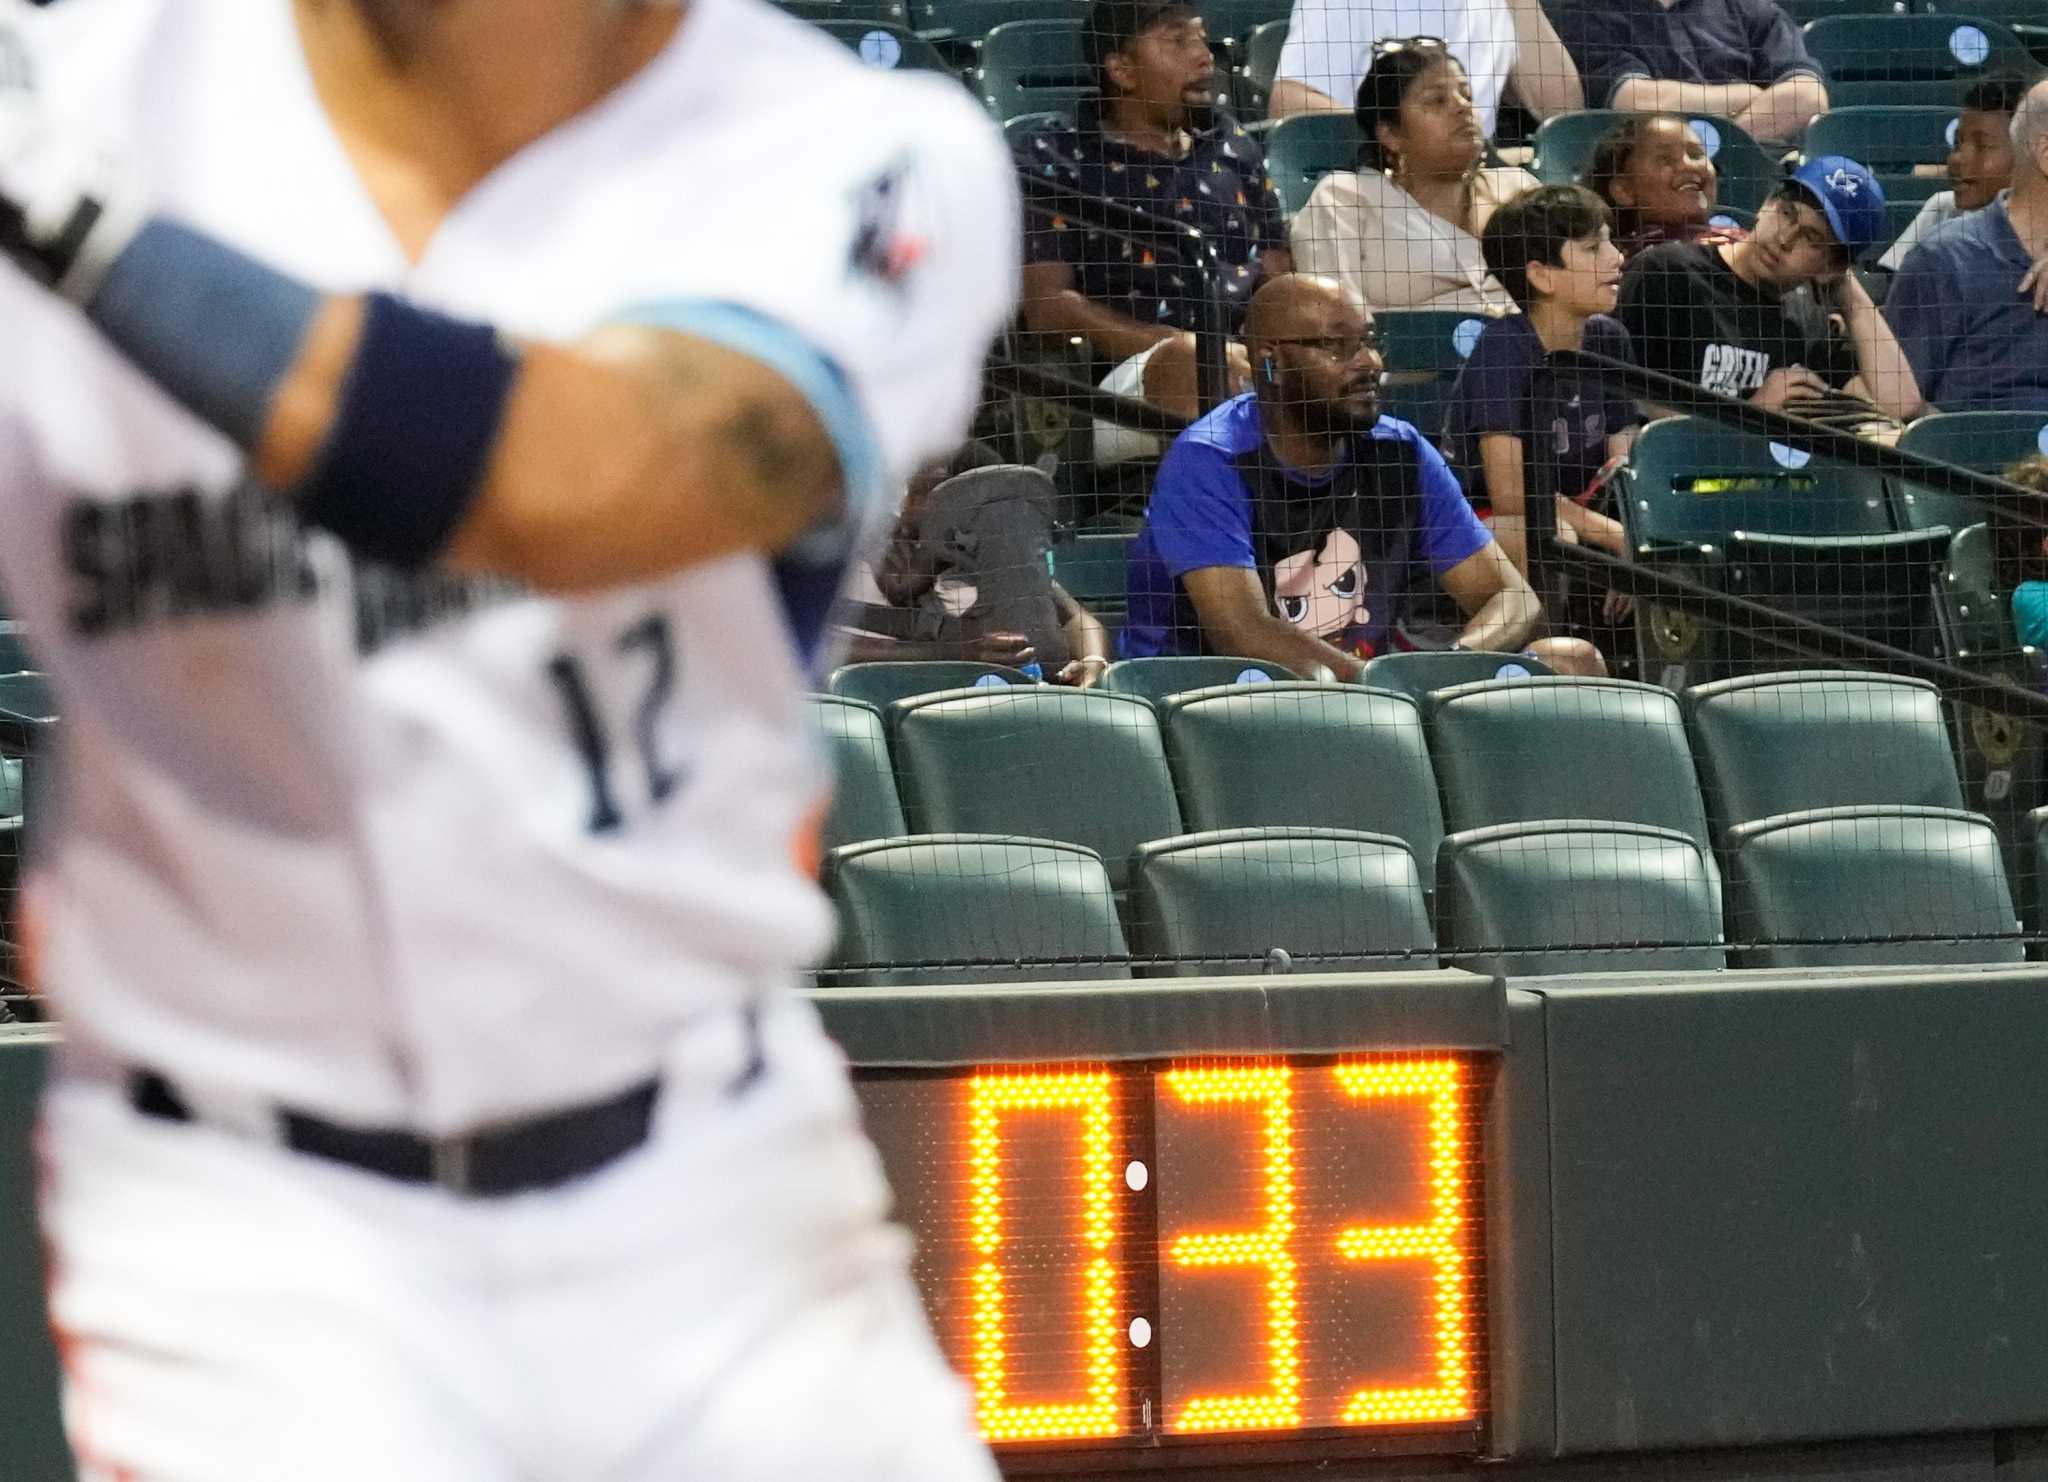 Houston Astros show struggles with new MLB pitch clock rules